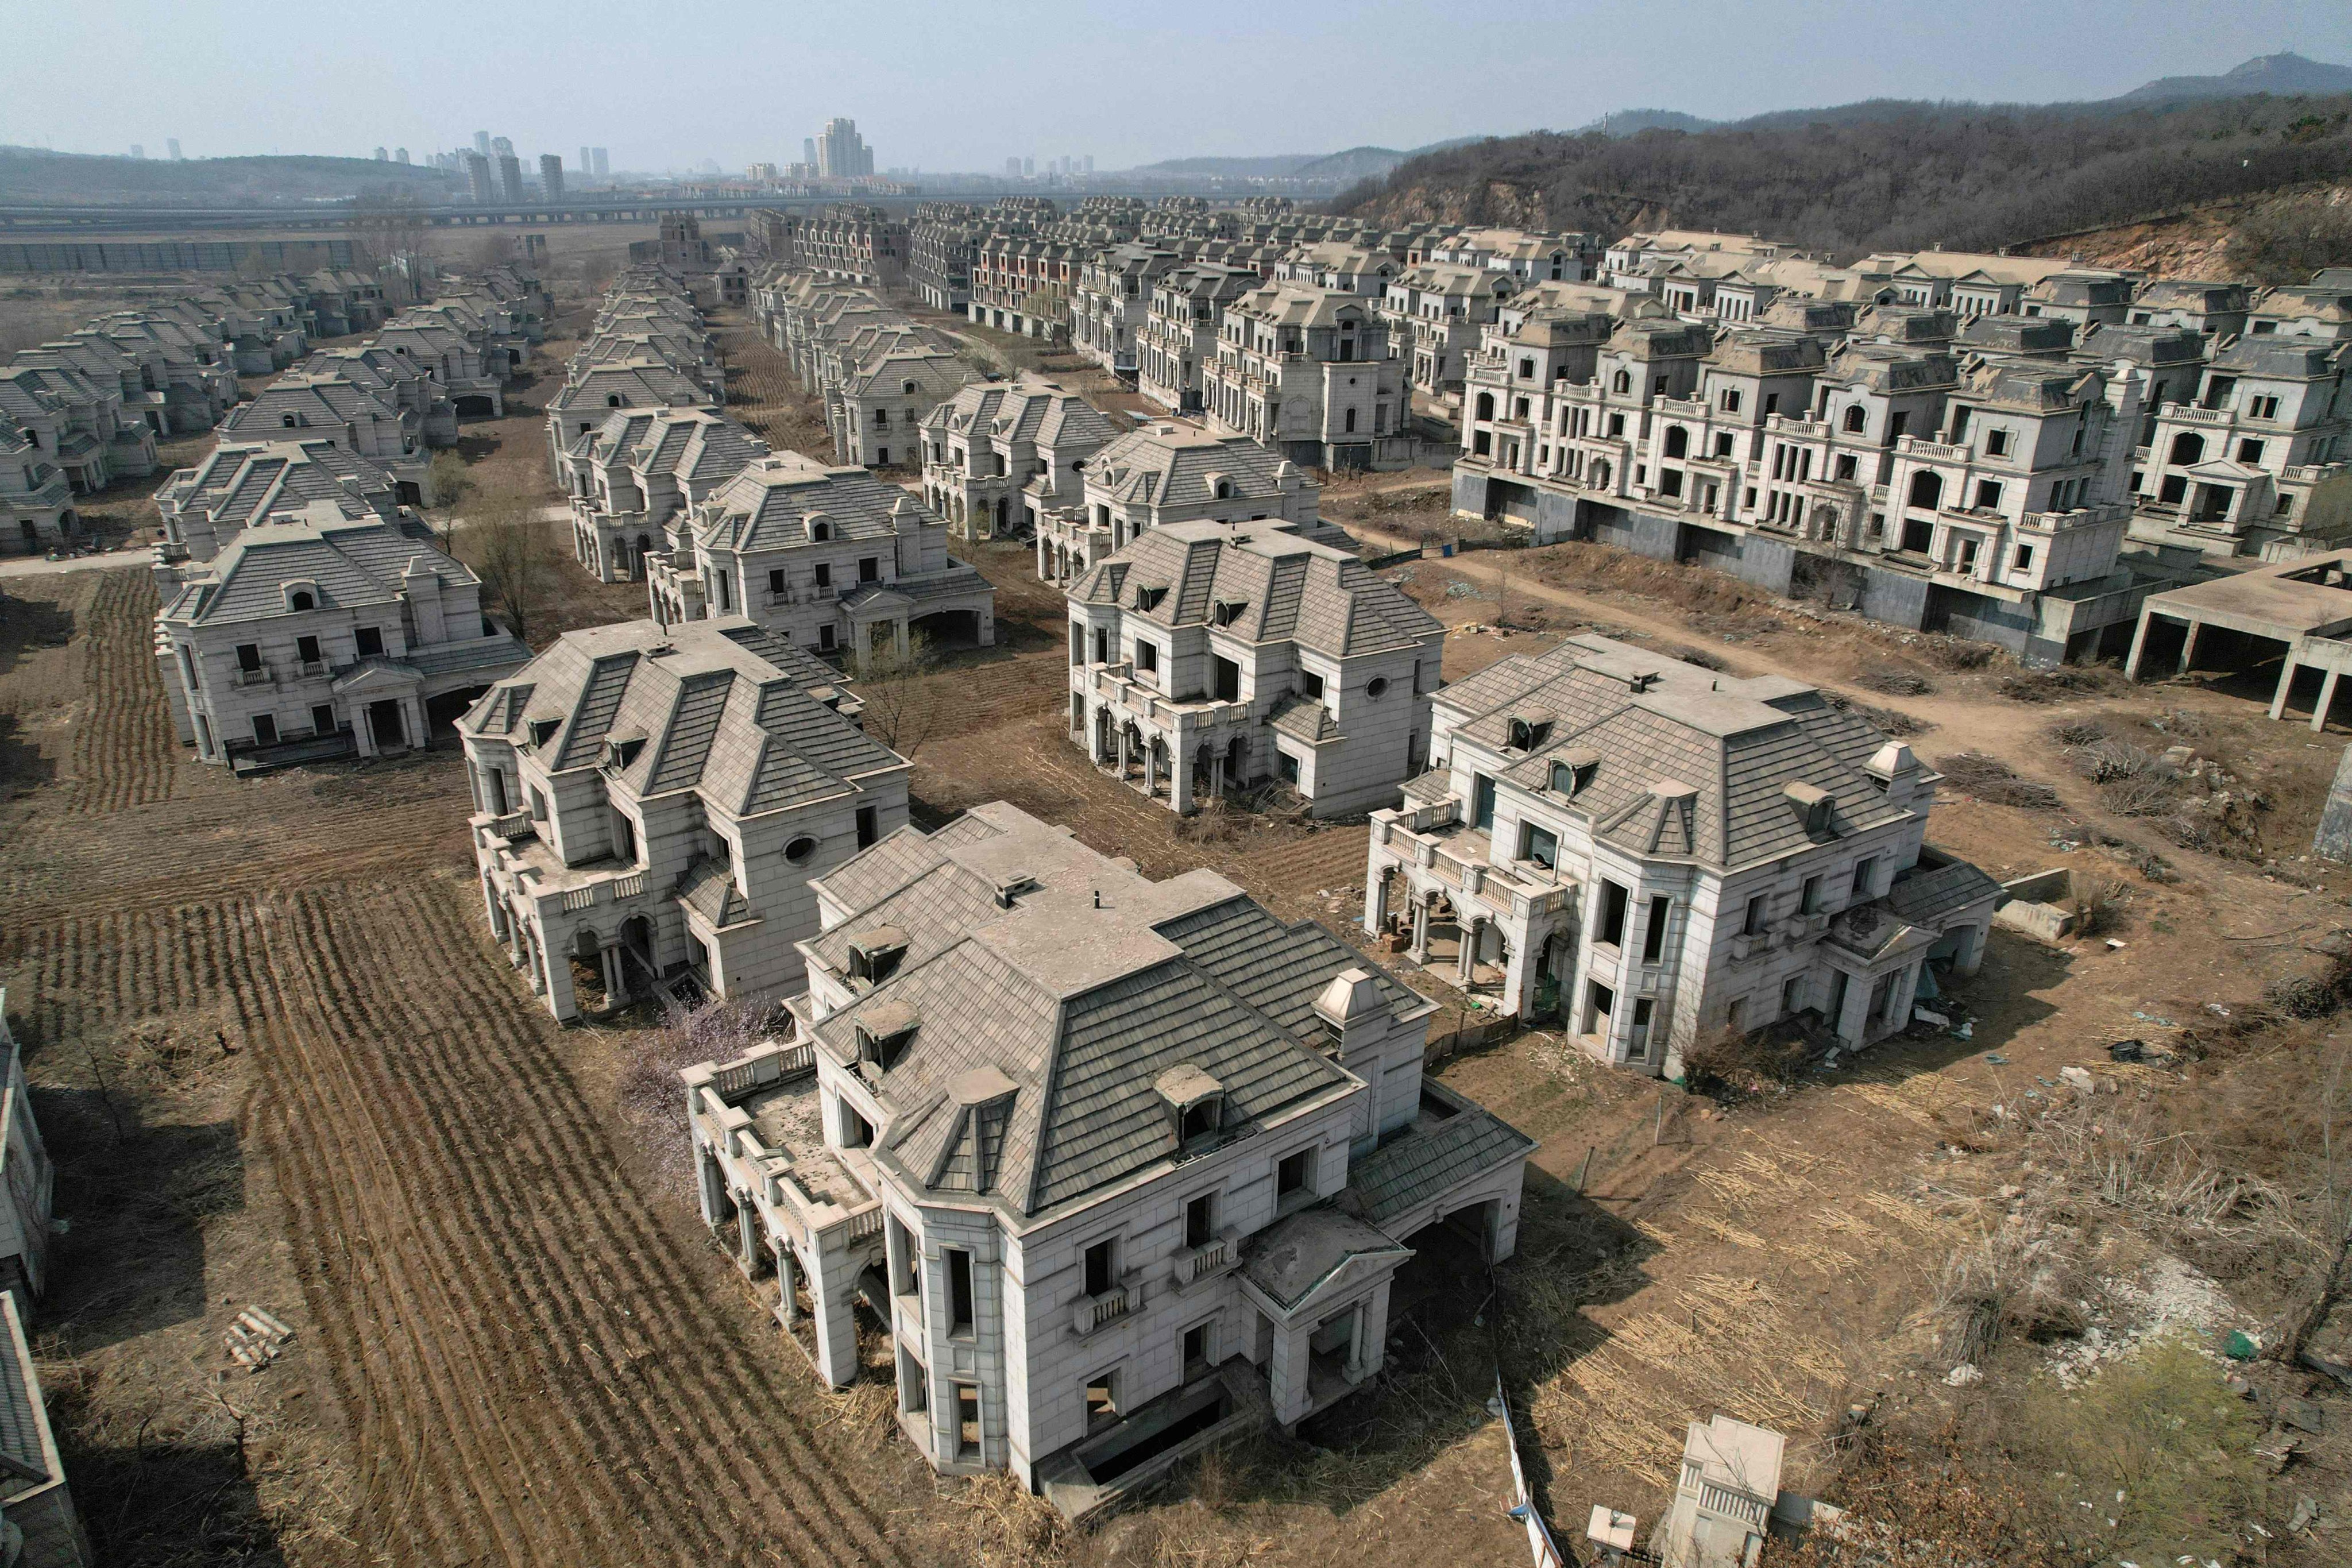 Deserted villas in a suburb of Shenyang, Liaoning province, are seen on March 31. The woes of China’s property sector have weighed heavily on the country’s economy and soured investor sentiment, but the strength of the economy’s fundamentals mean some are still projecting robust growth for 2024. Photo: AFP